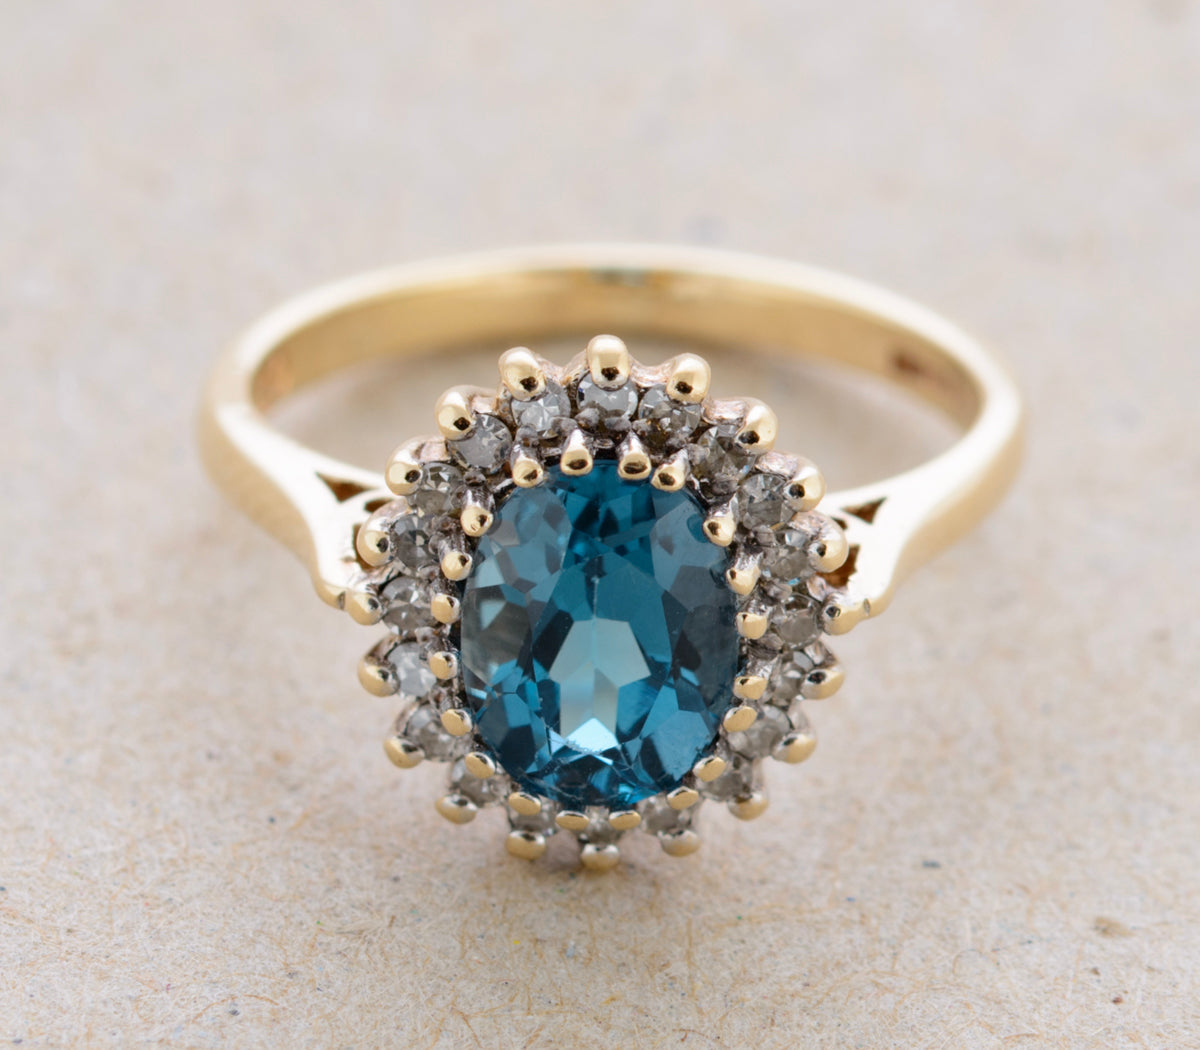 Vintage 1980's Natural London Blue Topaz With Diamond Halo Ring 9ct Gold (A1766)